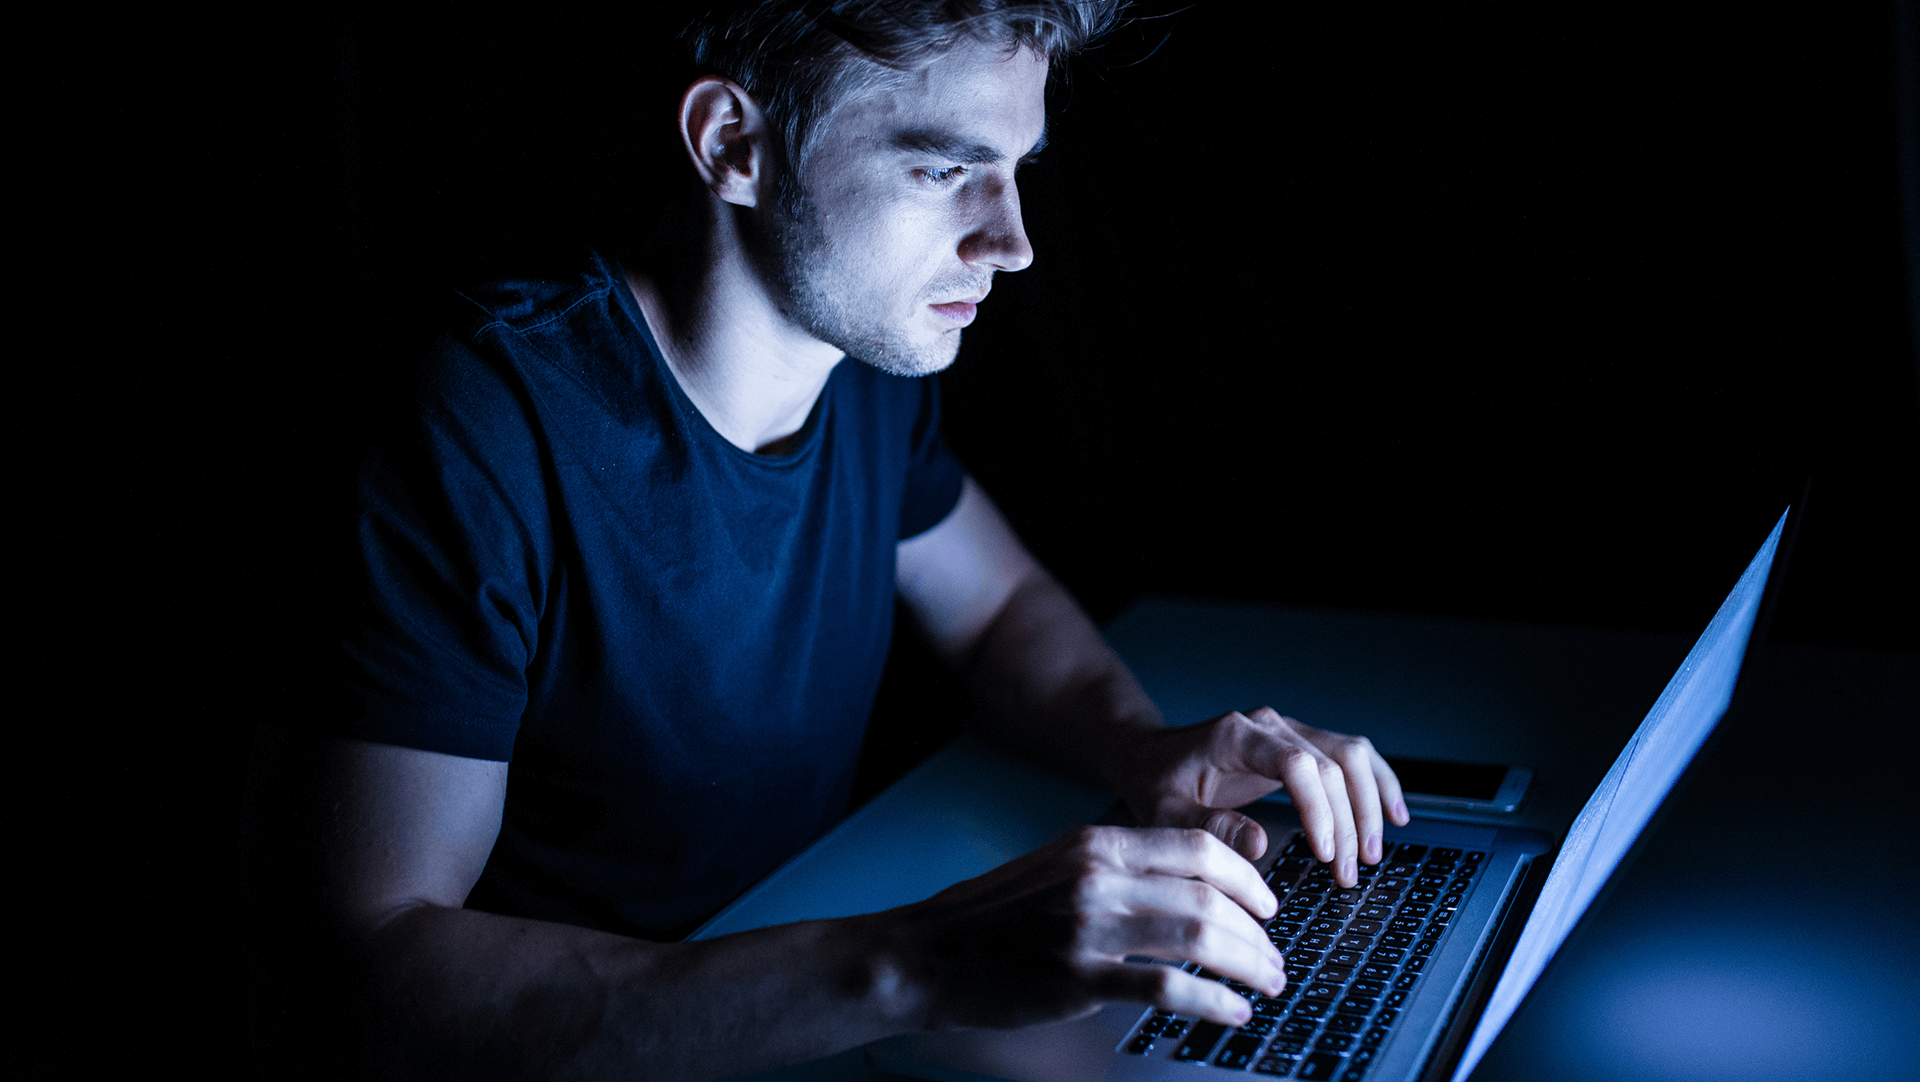 A man focused on his laptop screen in a dimly lit room, illuminated only by the blue light of the computer display.